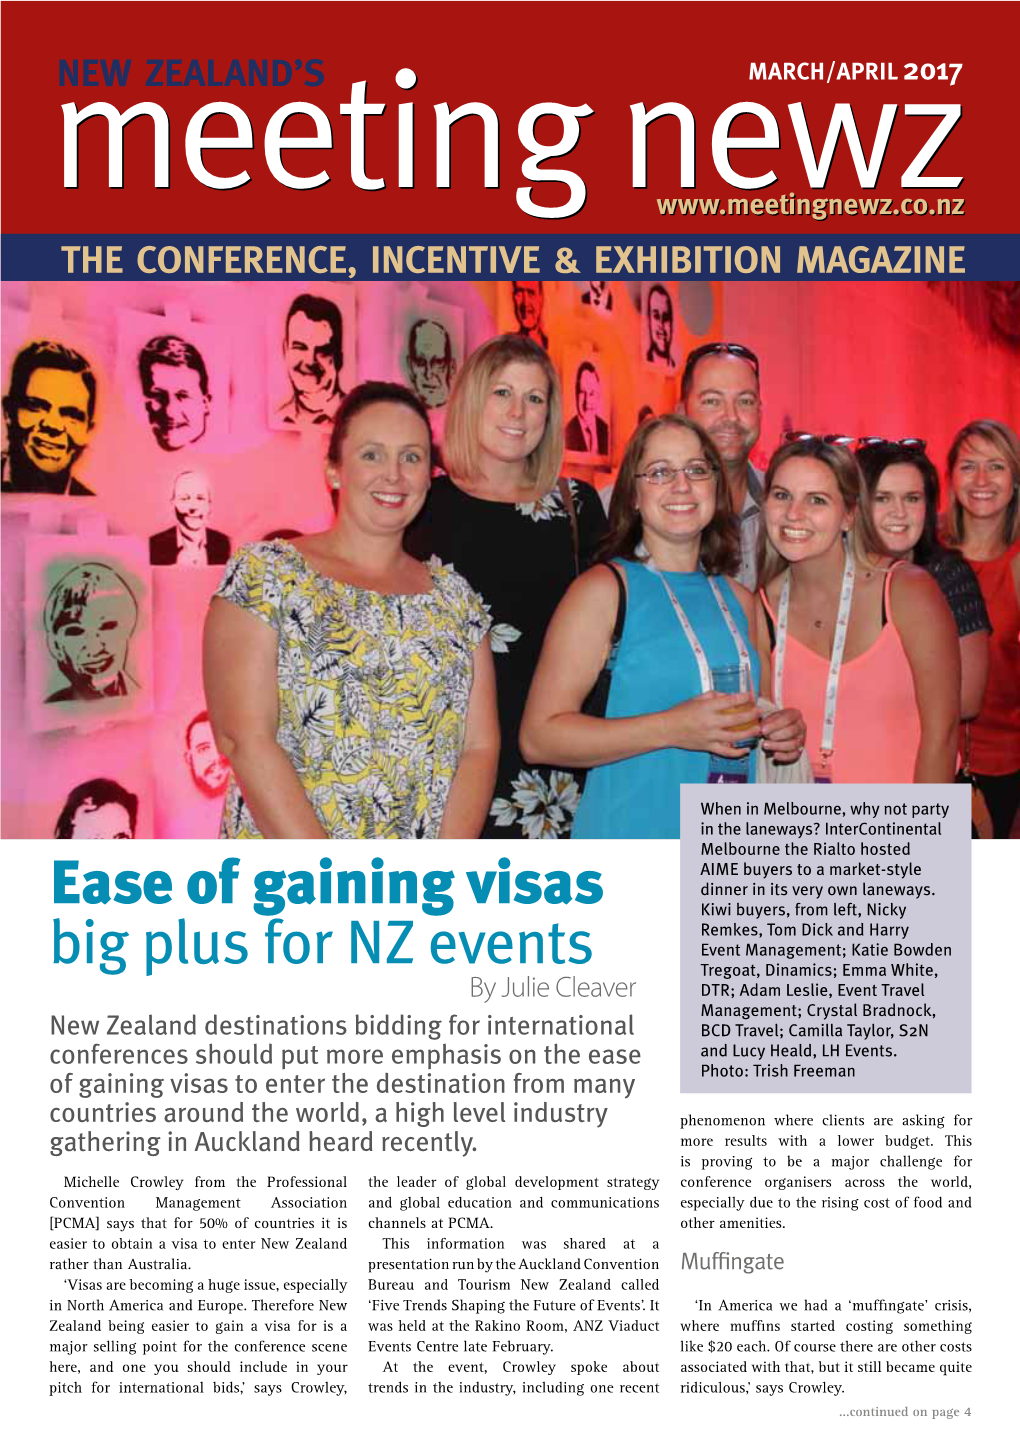 Ease of Gaining Visas Big Plus for NZ Events